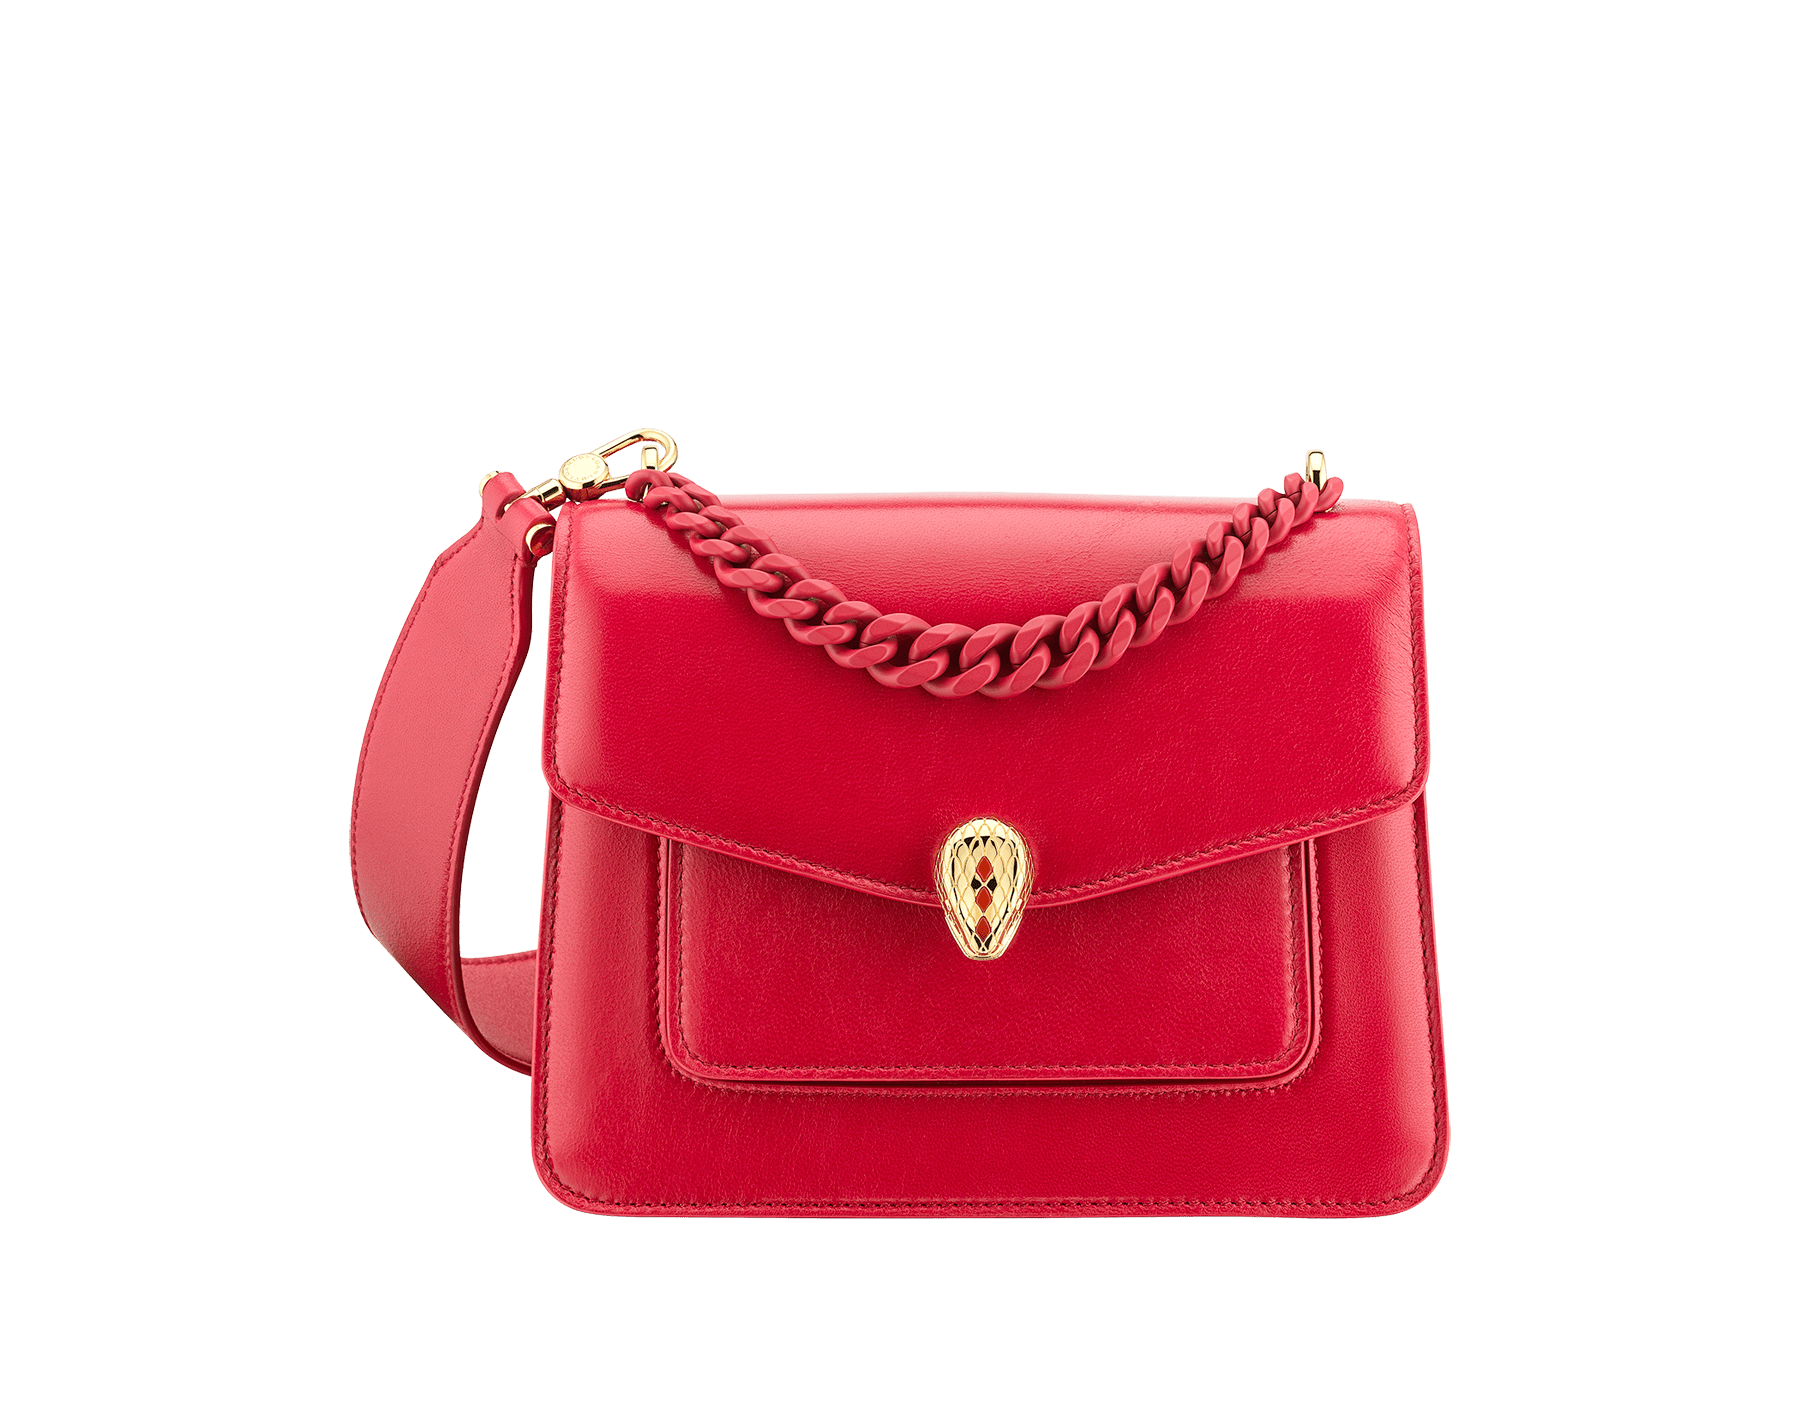 "Serpenti Forever" small maxi chain crossbody bag in peach nappa leather, with Lavender Amethyst lilac nappa leather inner lining. New Serpenti head closure in gold-plated brass, finished with small pink mother-of-pearl scales in the middle and red enamel eyes. 1134-MCNa image 1